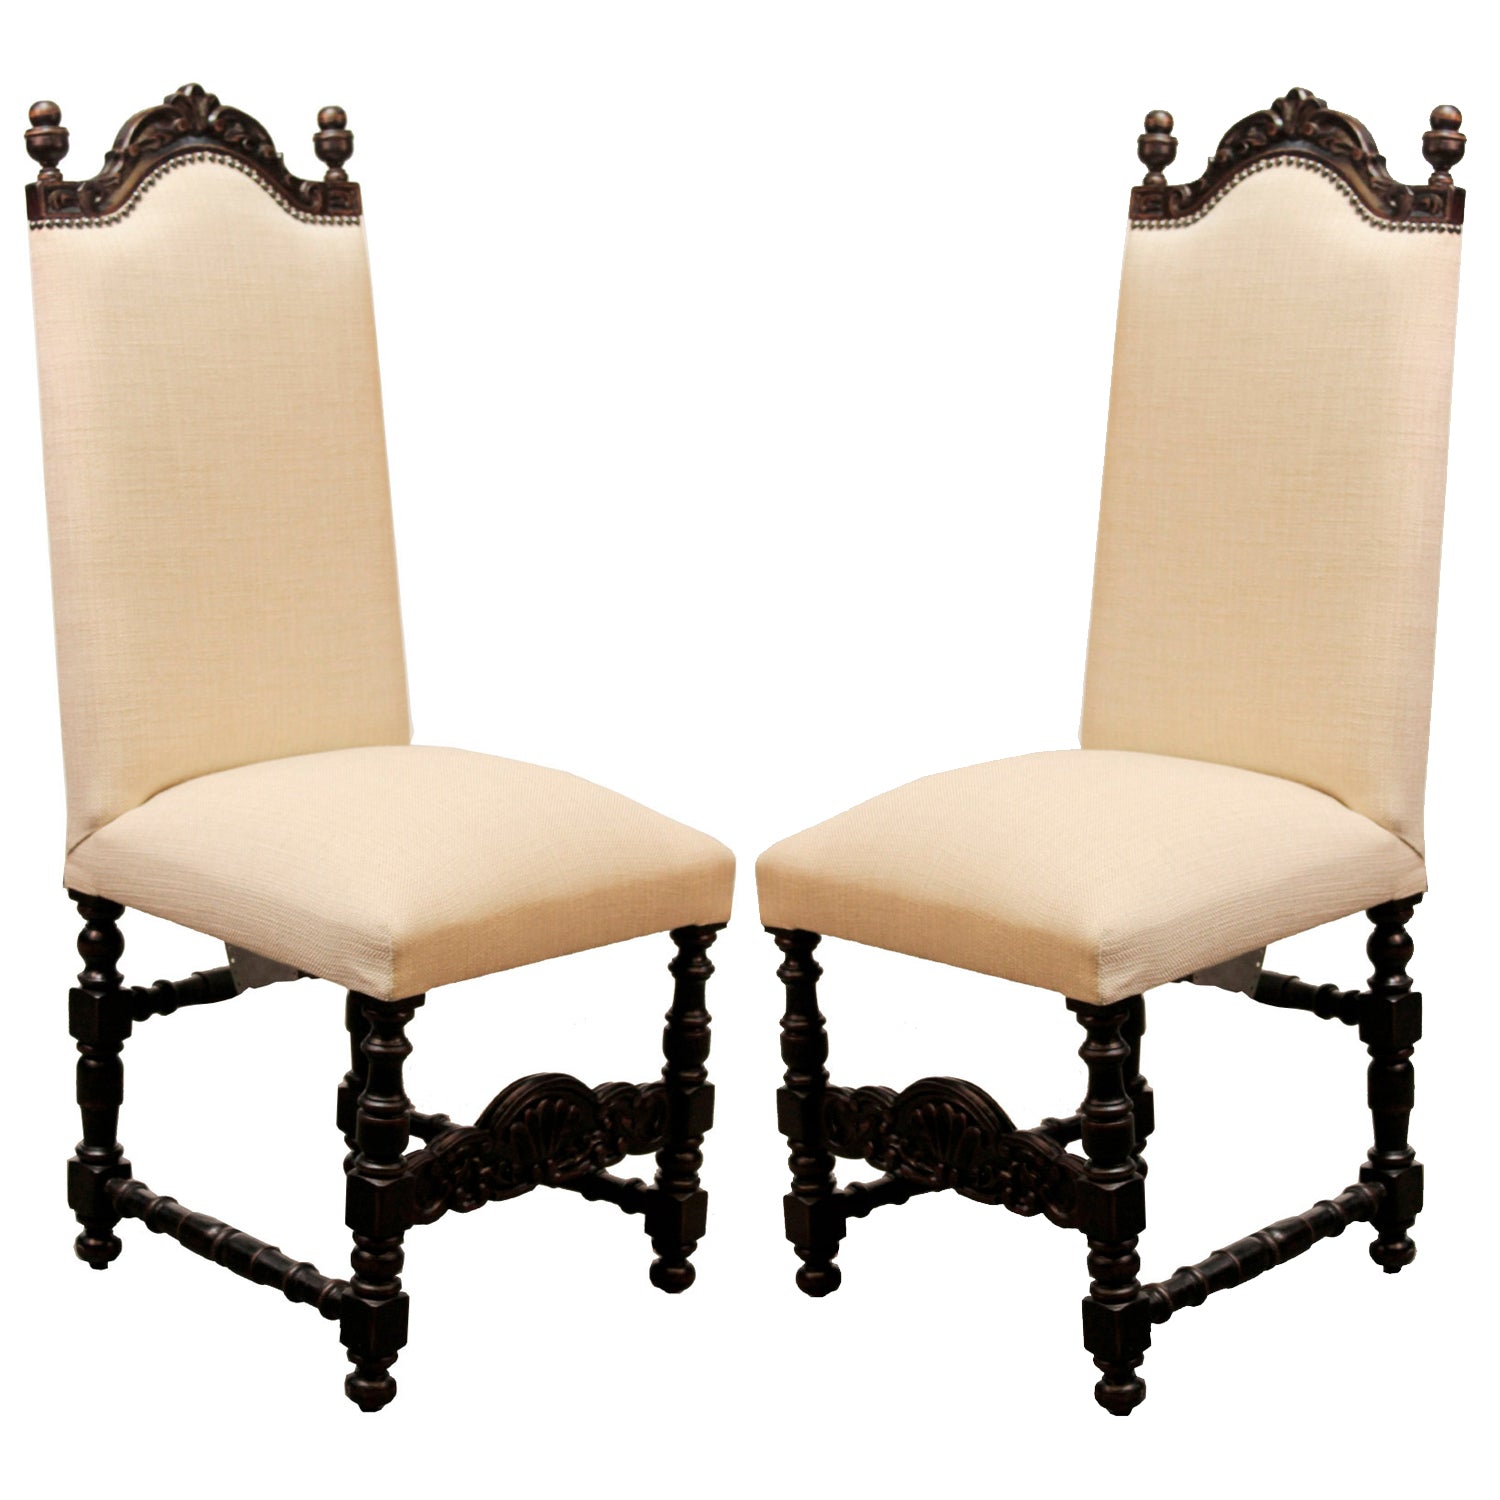 Grand Viceroy Dining Chair